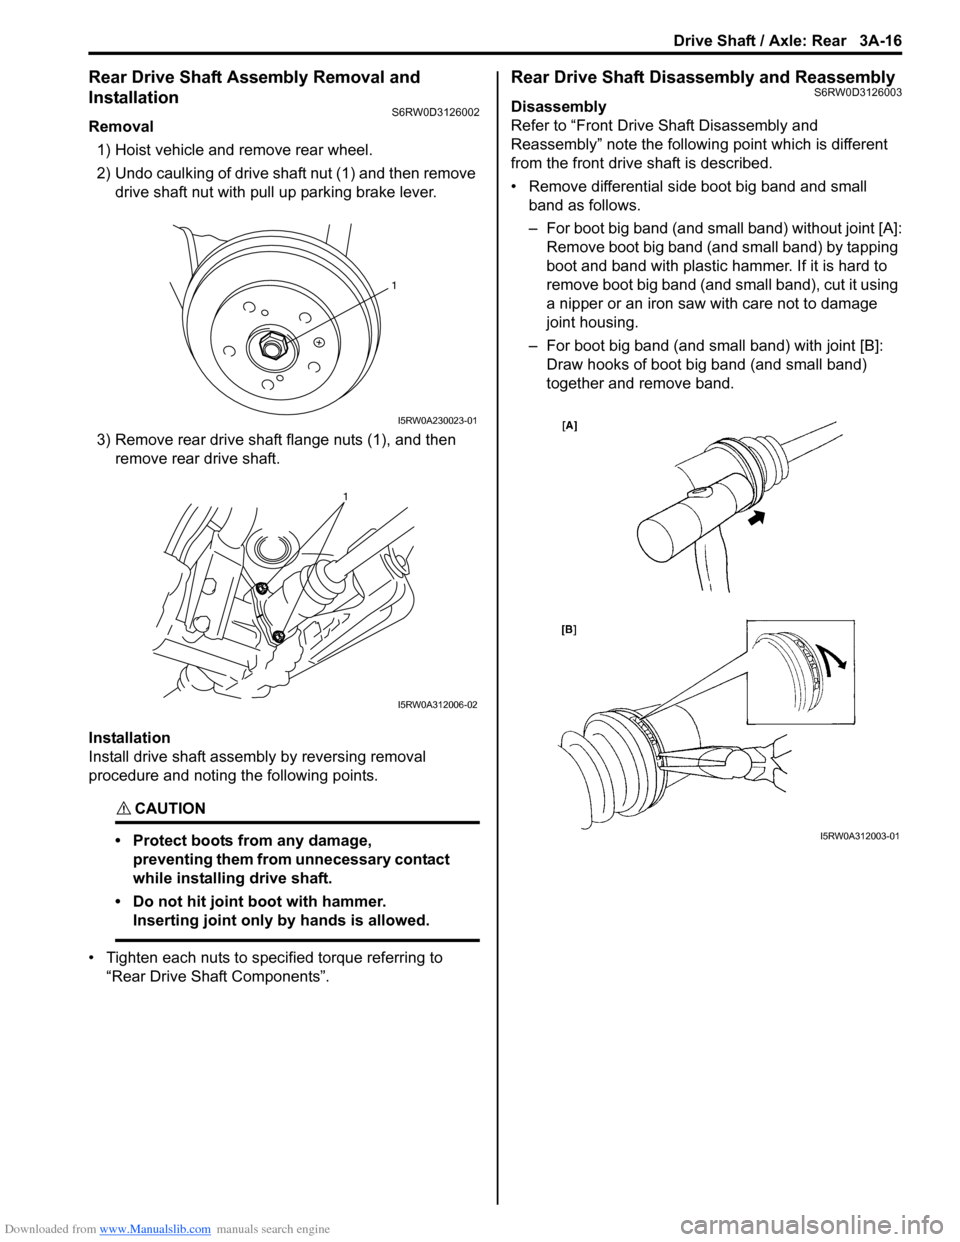 SUZUKI SX4 2006 1.G Service User Guide Downloaded from www.Manualslib.com manuals search engine Drive Shaft / Axle: Rear 3A-16
Rear Drive Shaft Assembly Removal and 
Installation
S6RW0D3126002
Removal
1) Hoist vehicle and remove rear wheel